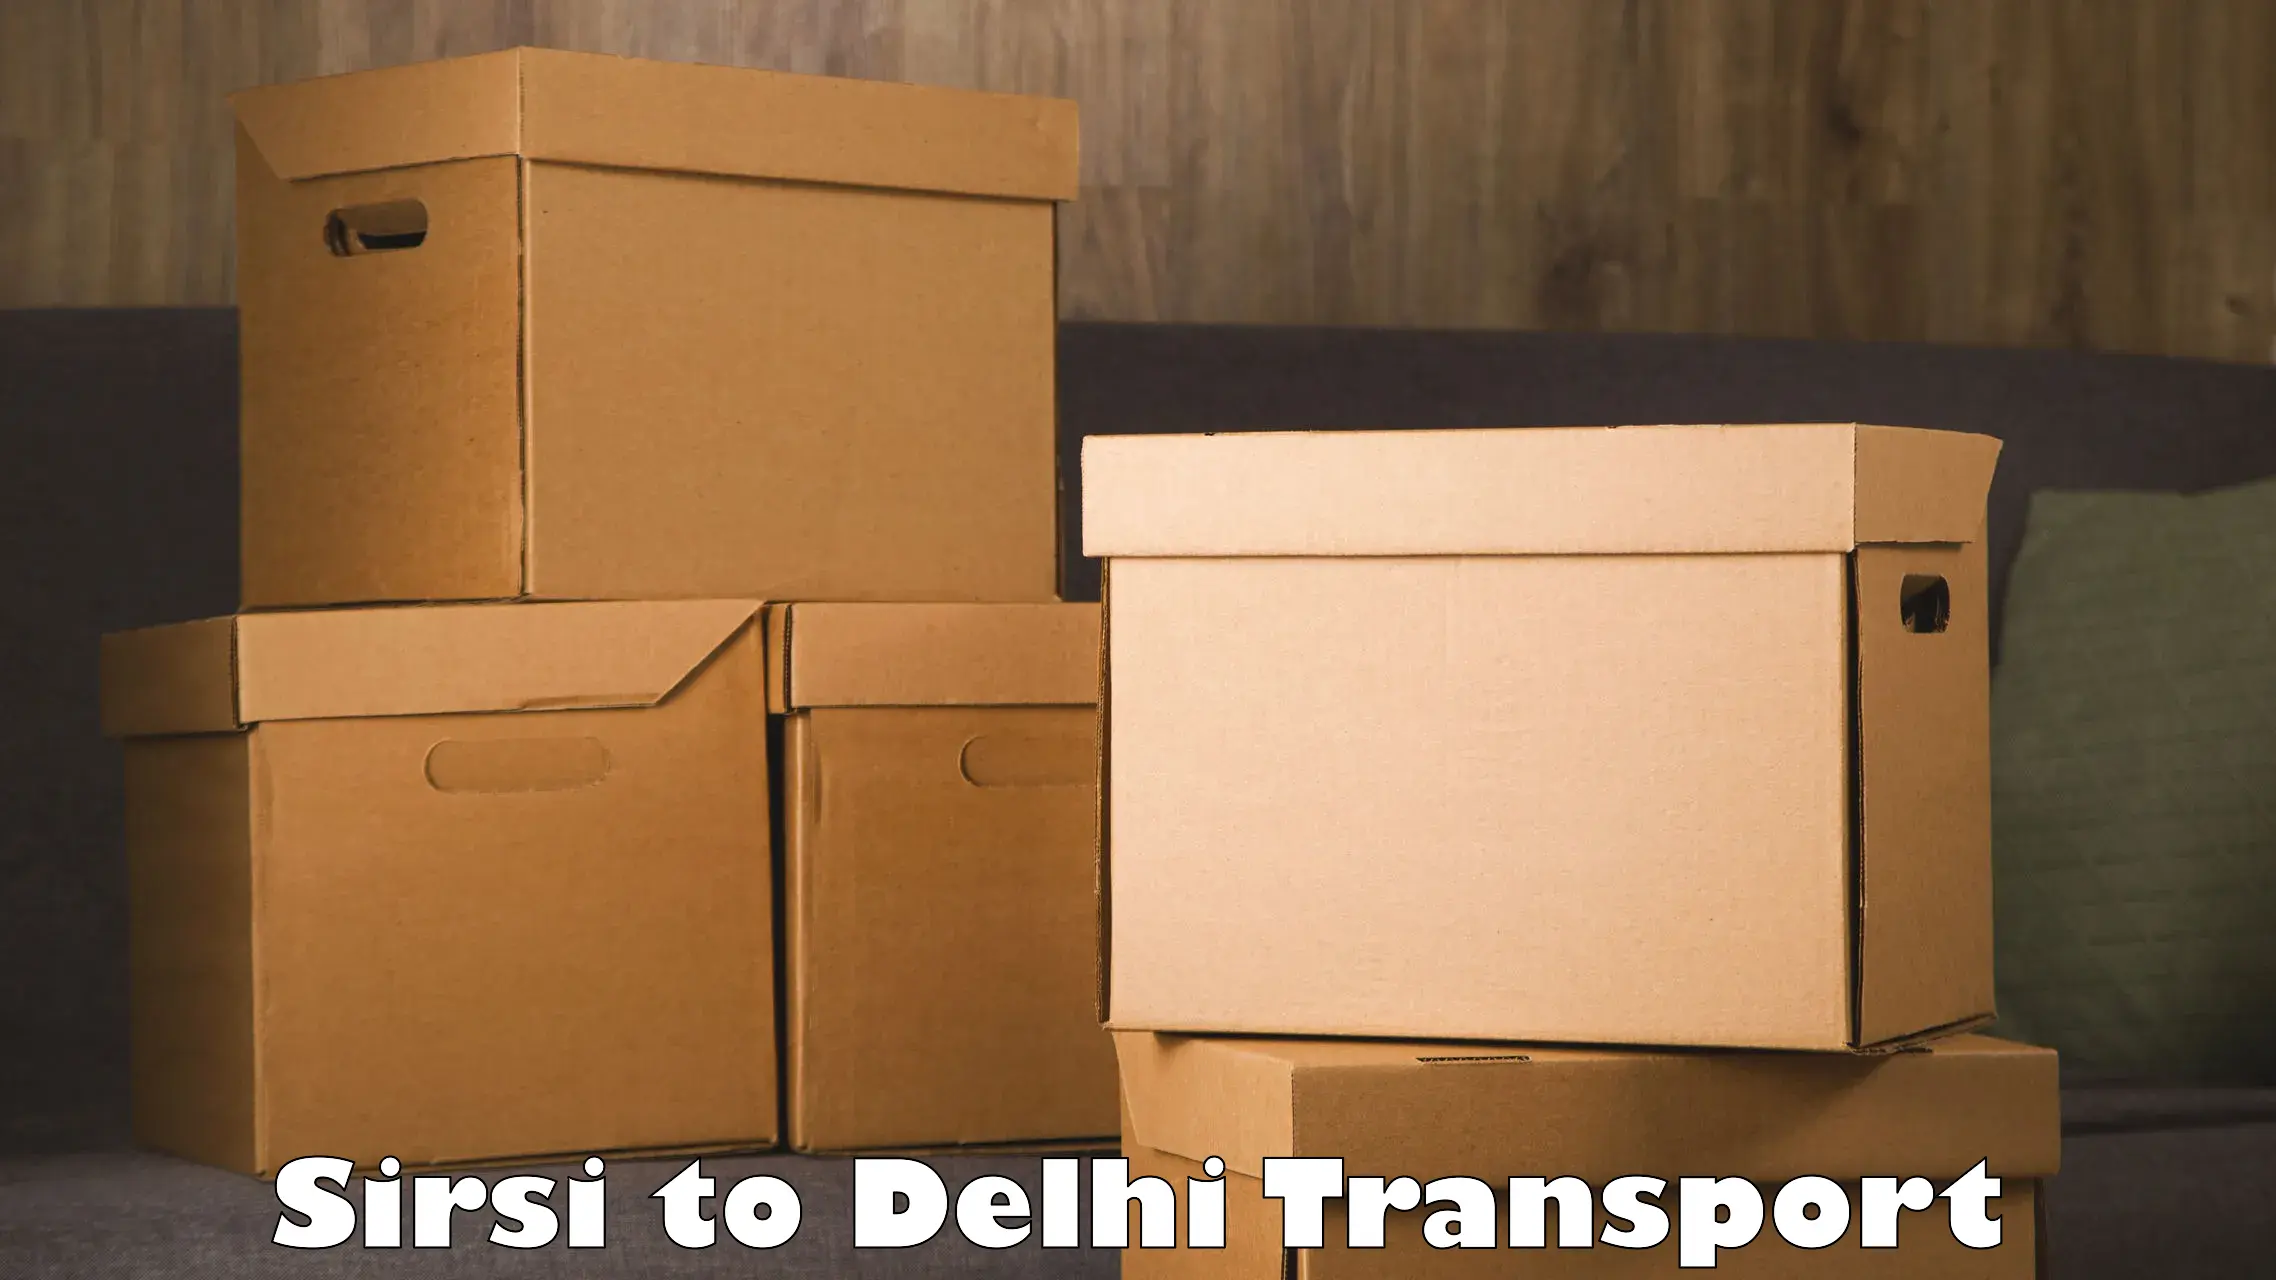 Nearby transport service Sirsi to IIT Delhi